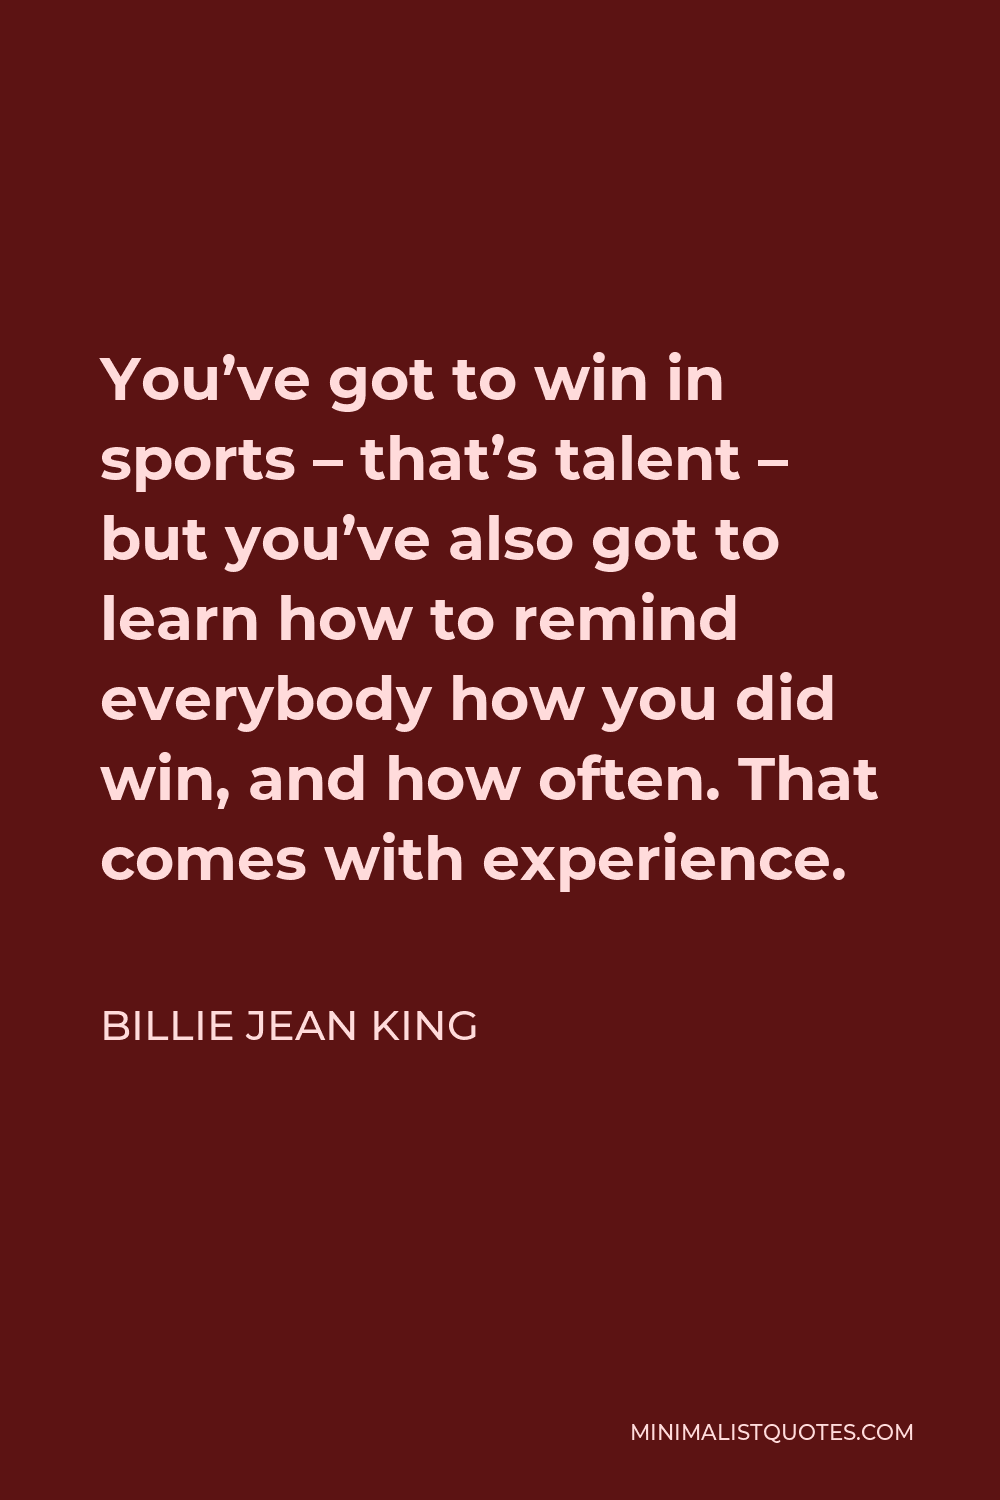 Billie Jean King Quote - You’ve got to win in sports – that’s talent – but you’ve also got to learn how to remind everybody how you did win, and how often. That comes with experience.